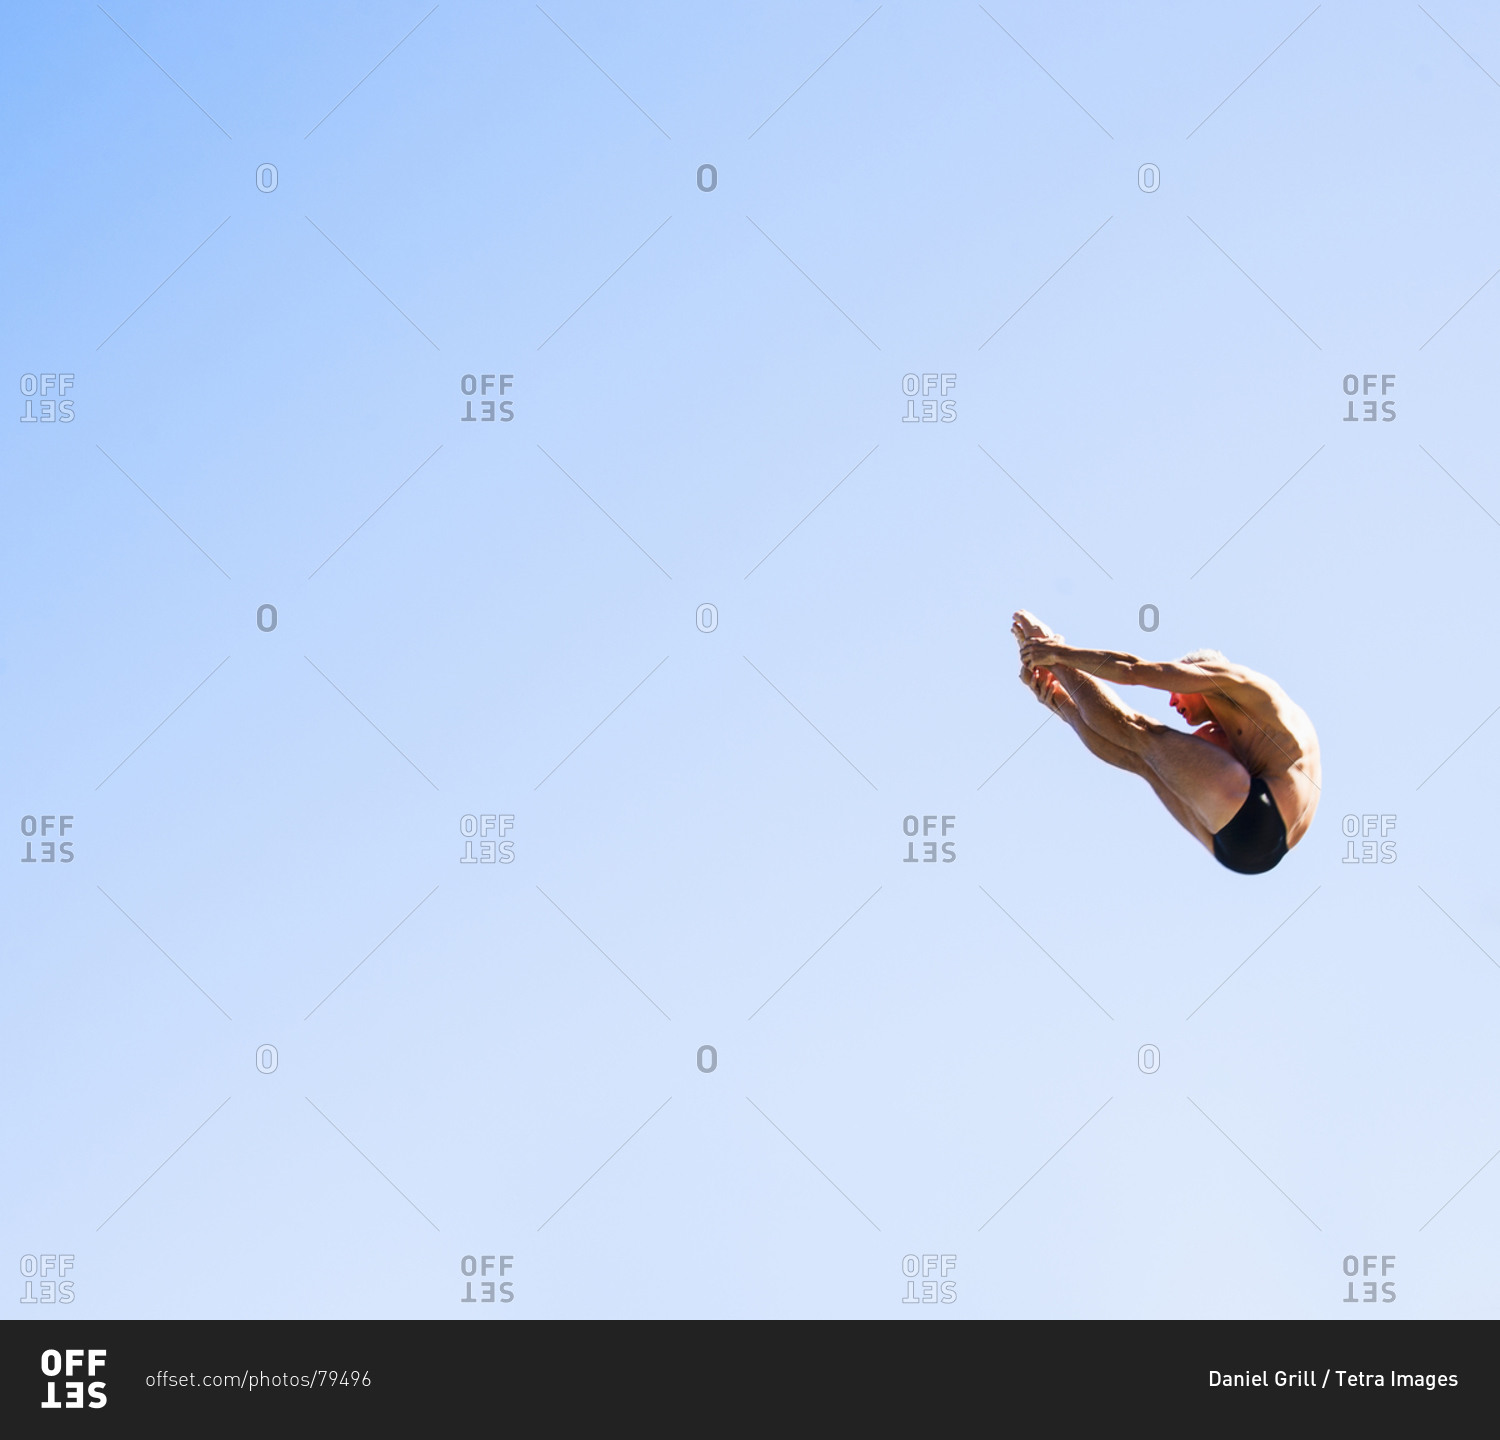 Athletic swimmer mid-air against blue sky